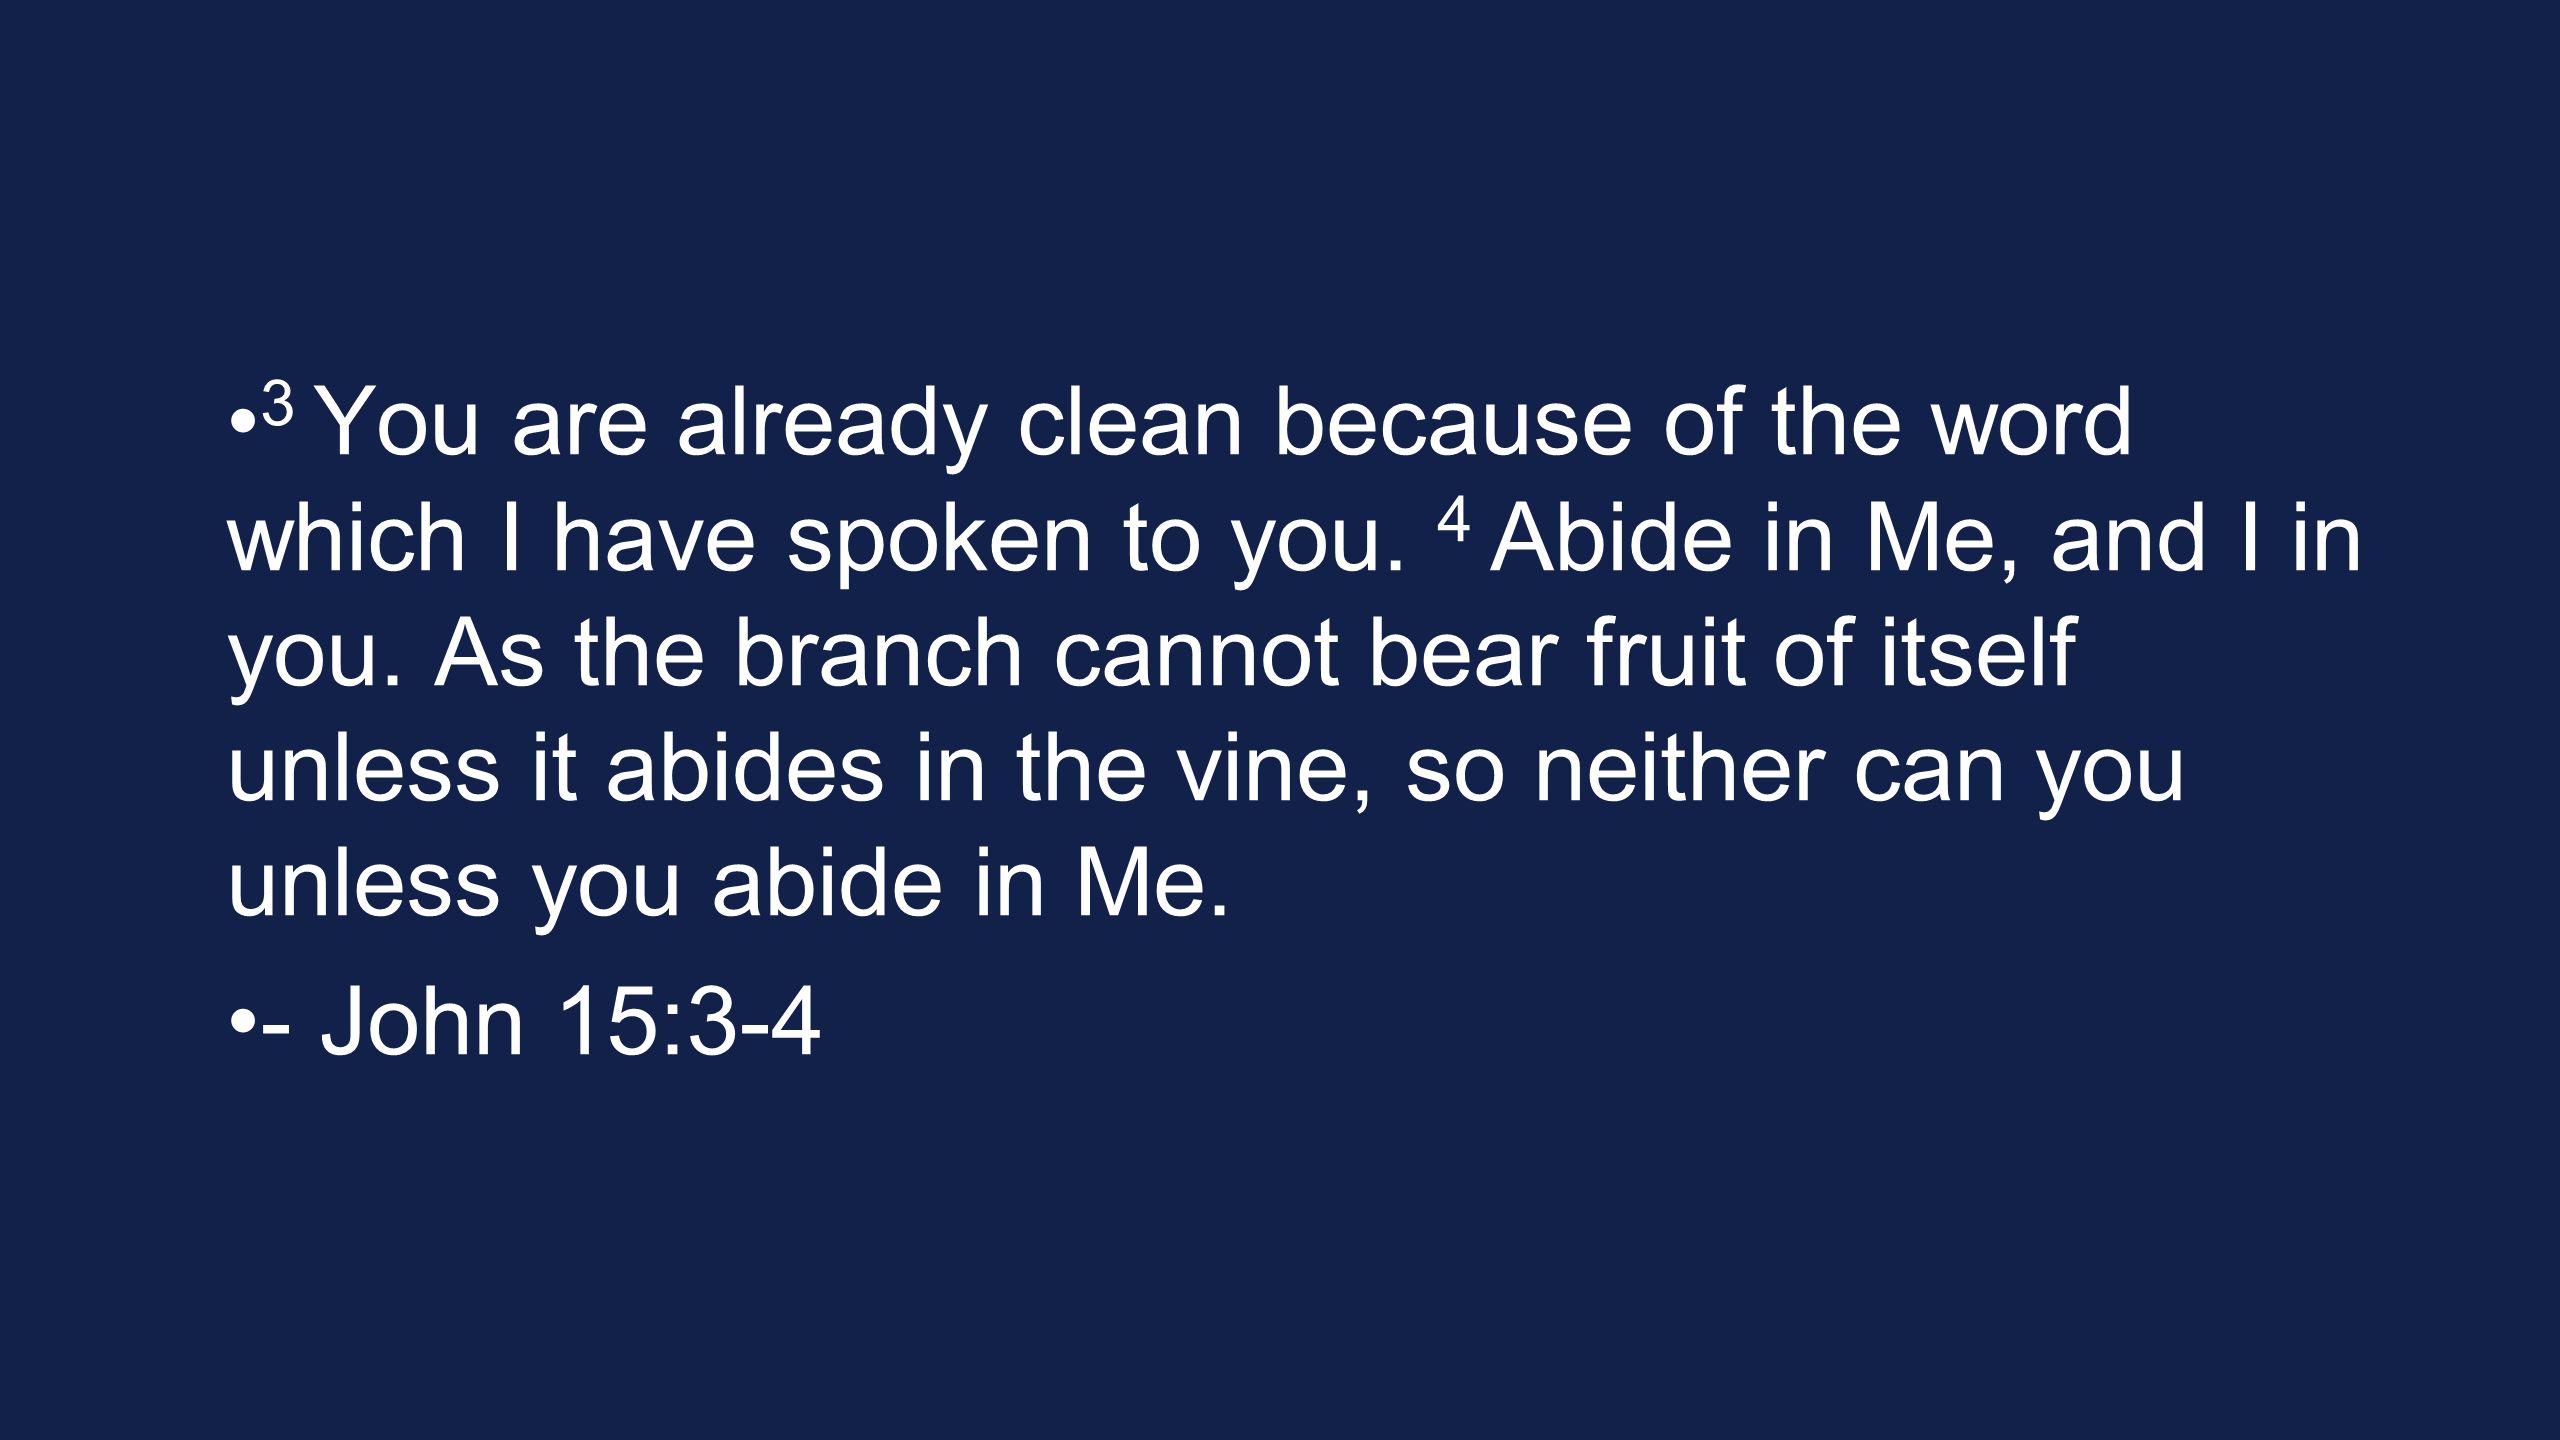 3 You are already clean because of the word which I have spoken to you.